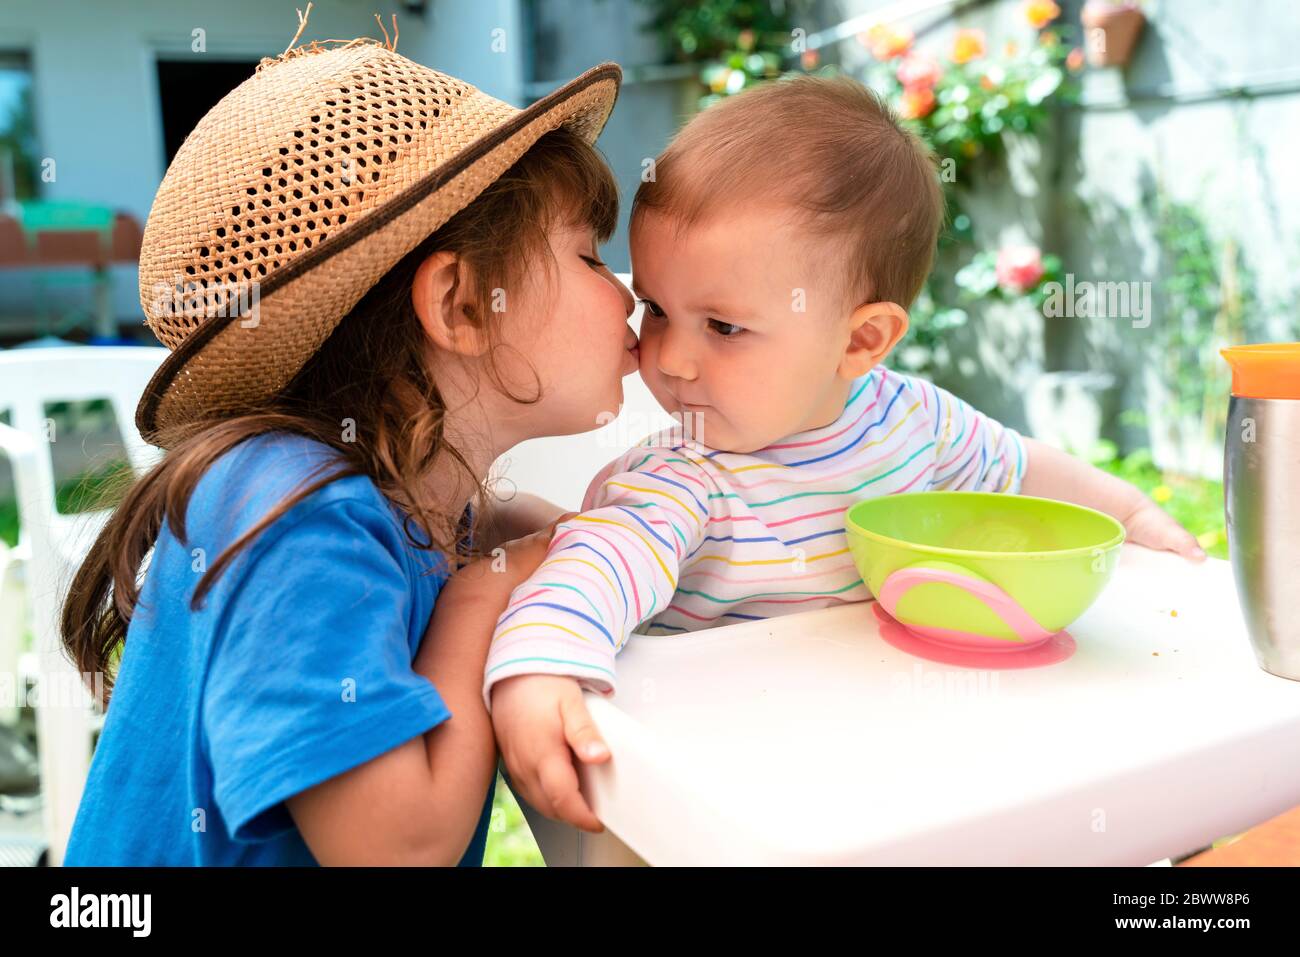 Little girl kissing her younger sister at backyard in spring Stock Photo